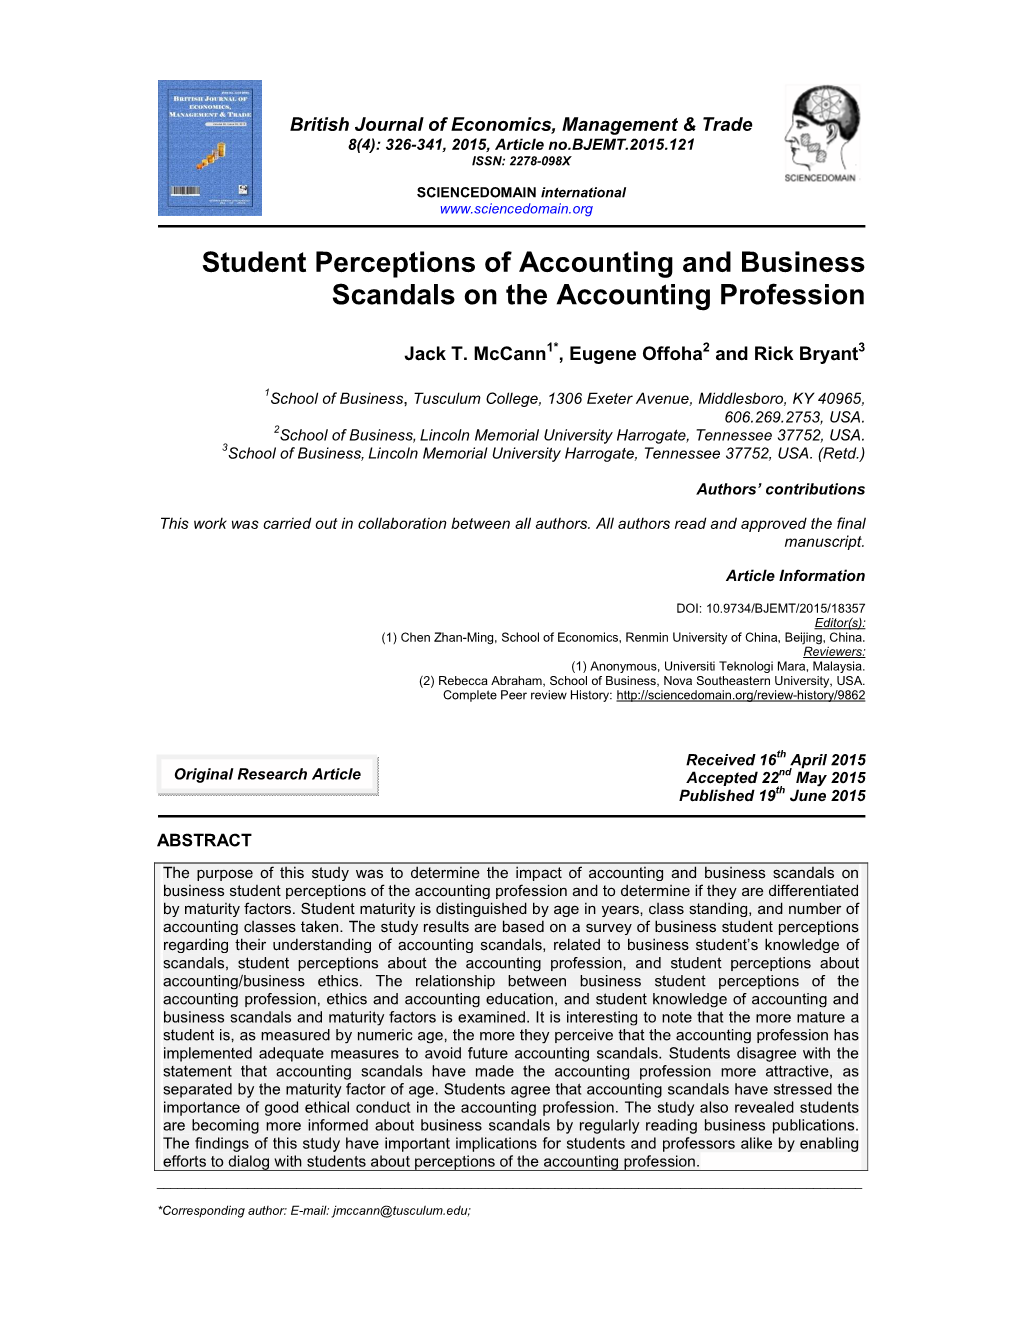 Student Perceptions of Accounting and Business Scandals on the Accounting Profession